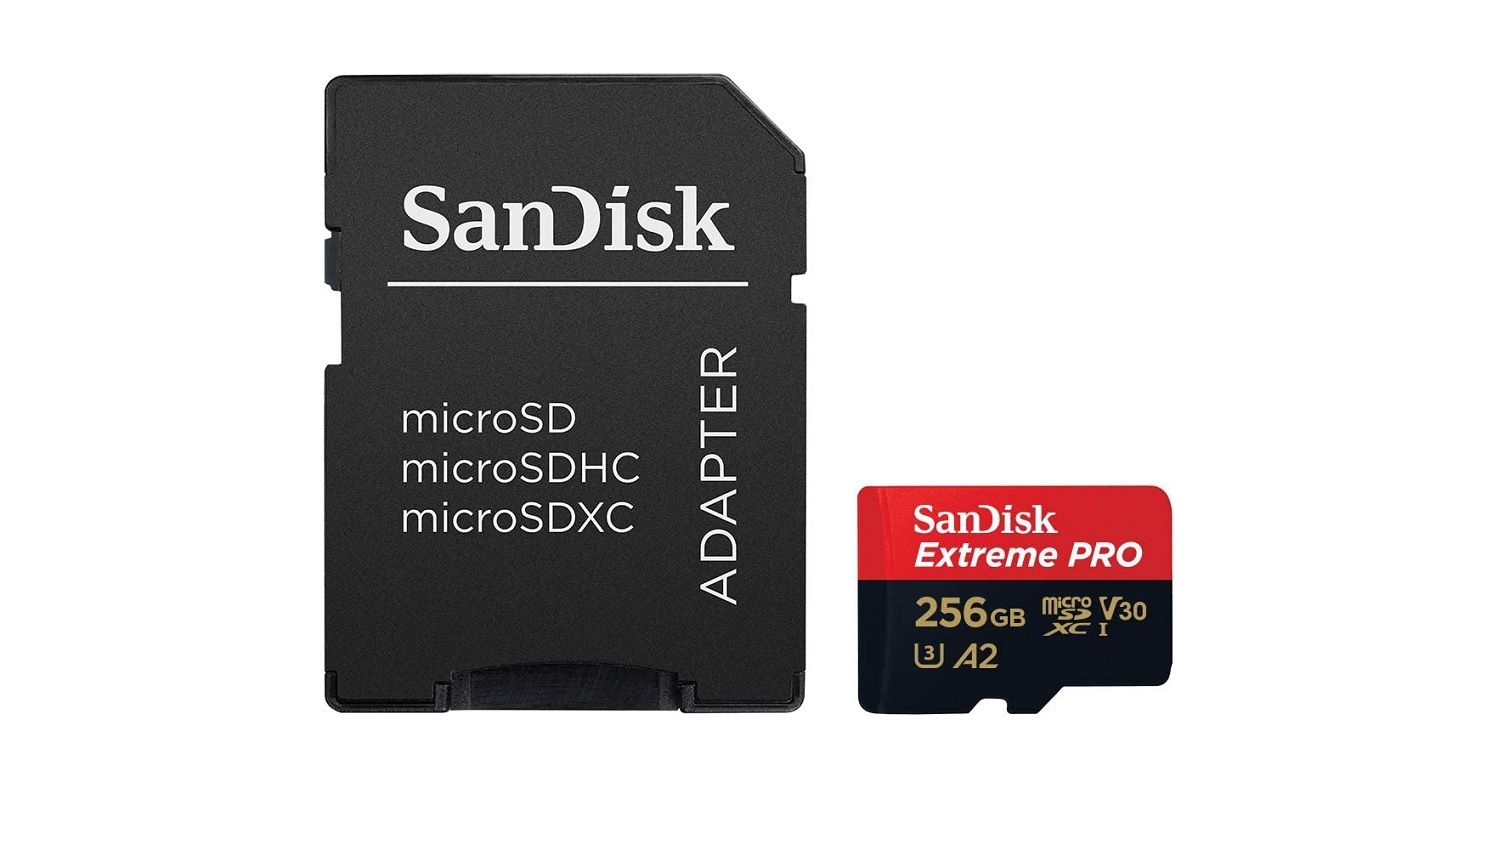 sandisk extreme pro microsd side by side an sd adapter